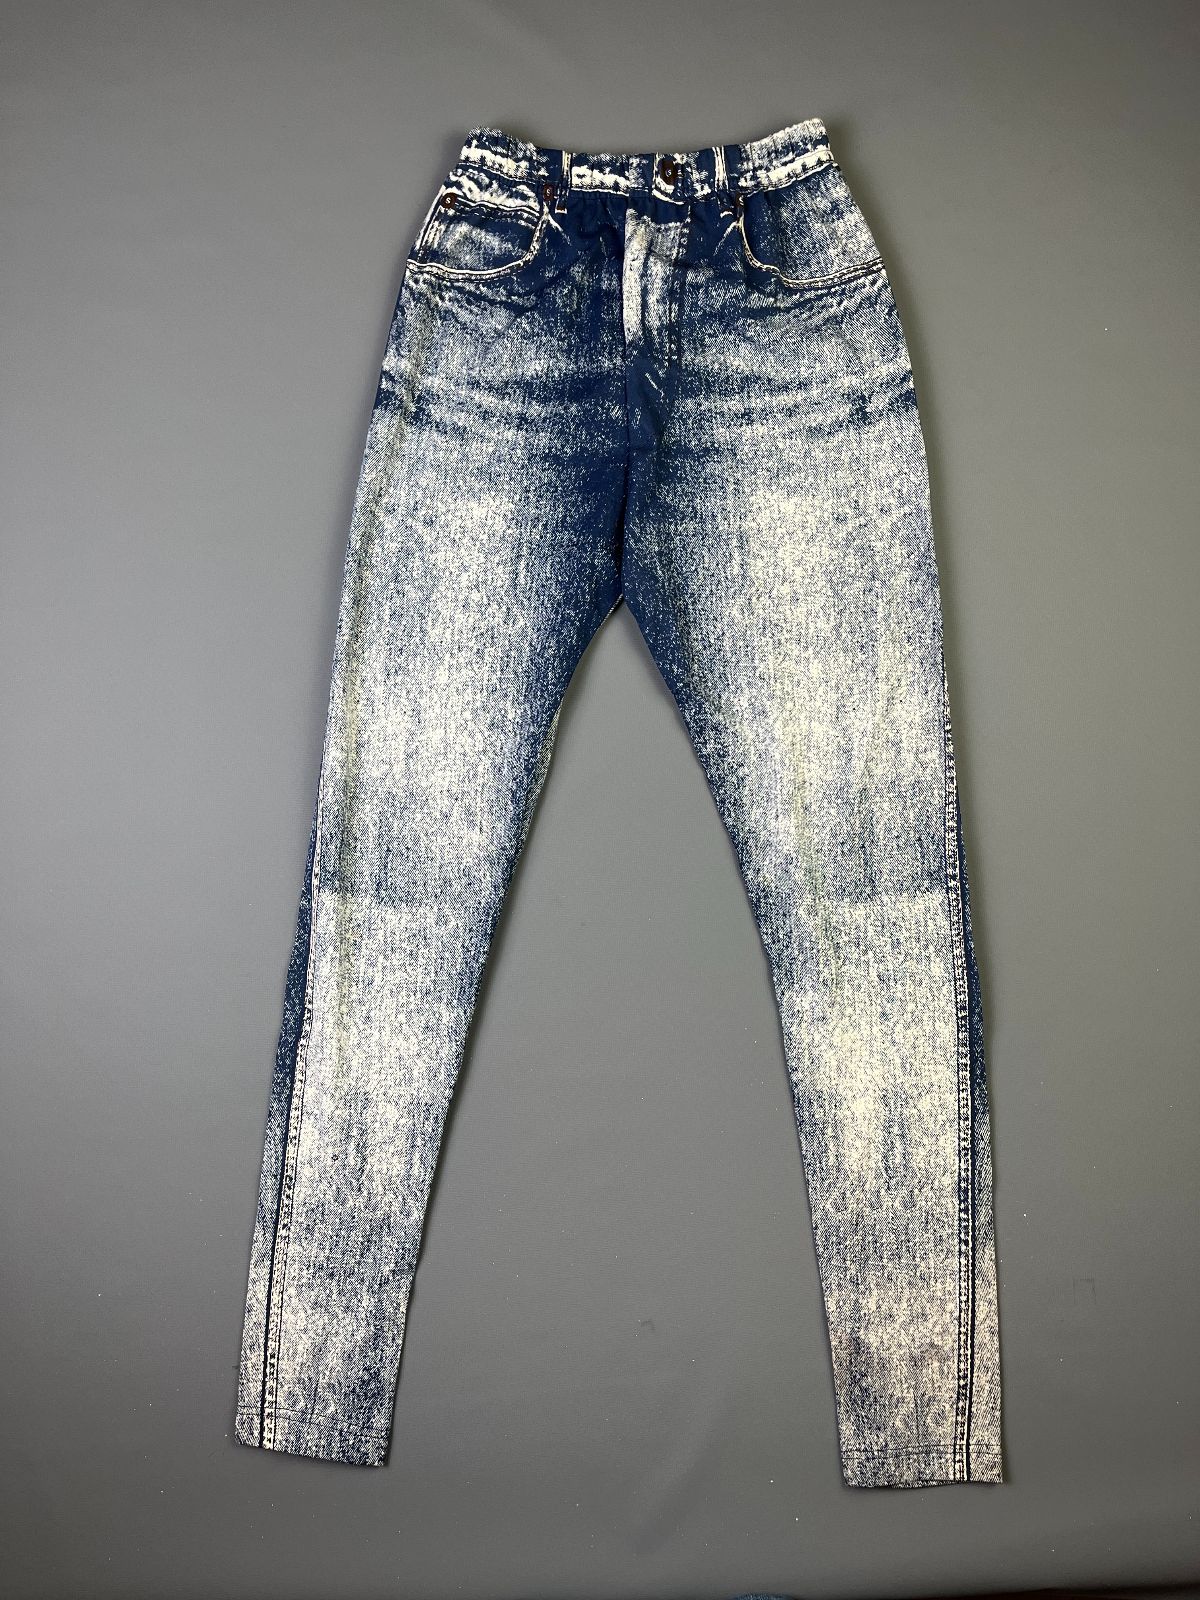 product details: 1980S DEADSTOCK FUN! FAUX DENIM LEGGING PANTS * I CANT BELIEVE ITS NOT A JEAN! photo